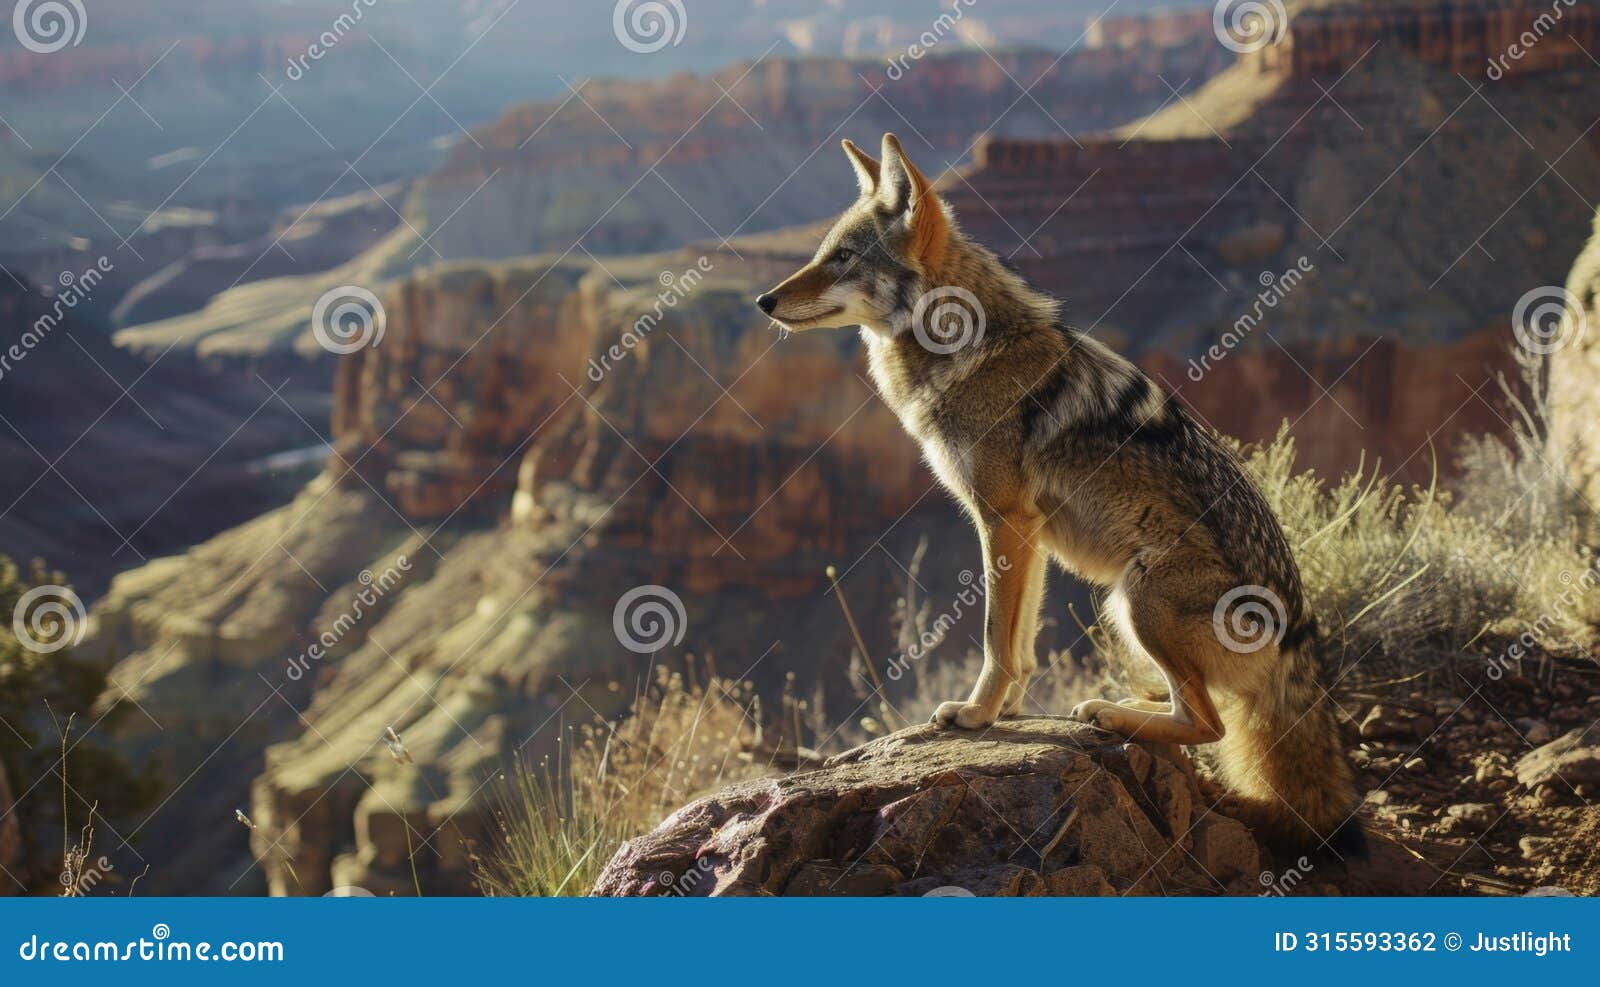 the mournful cries of coyotes reverberating through a deep canyon creating an otherworldly symphony.